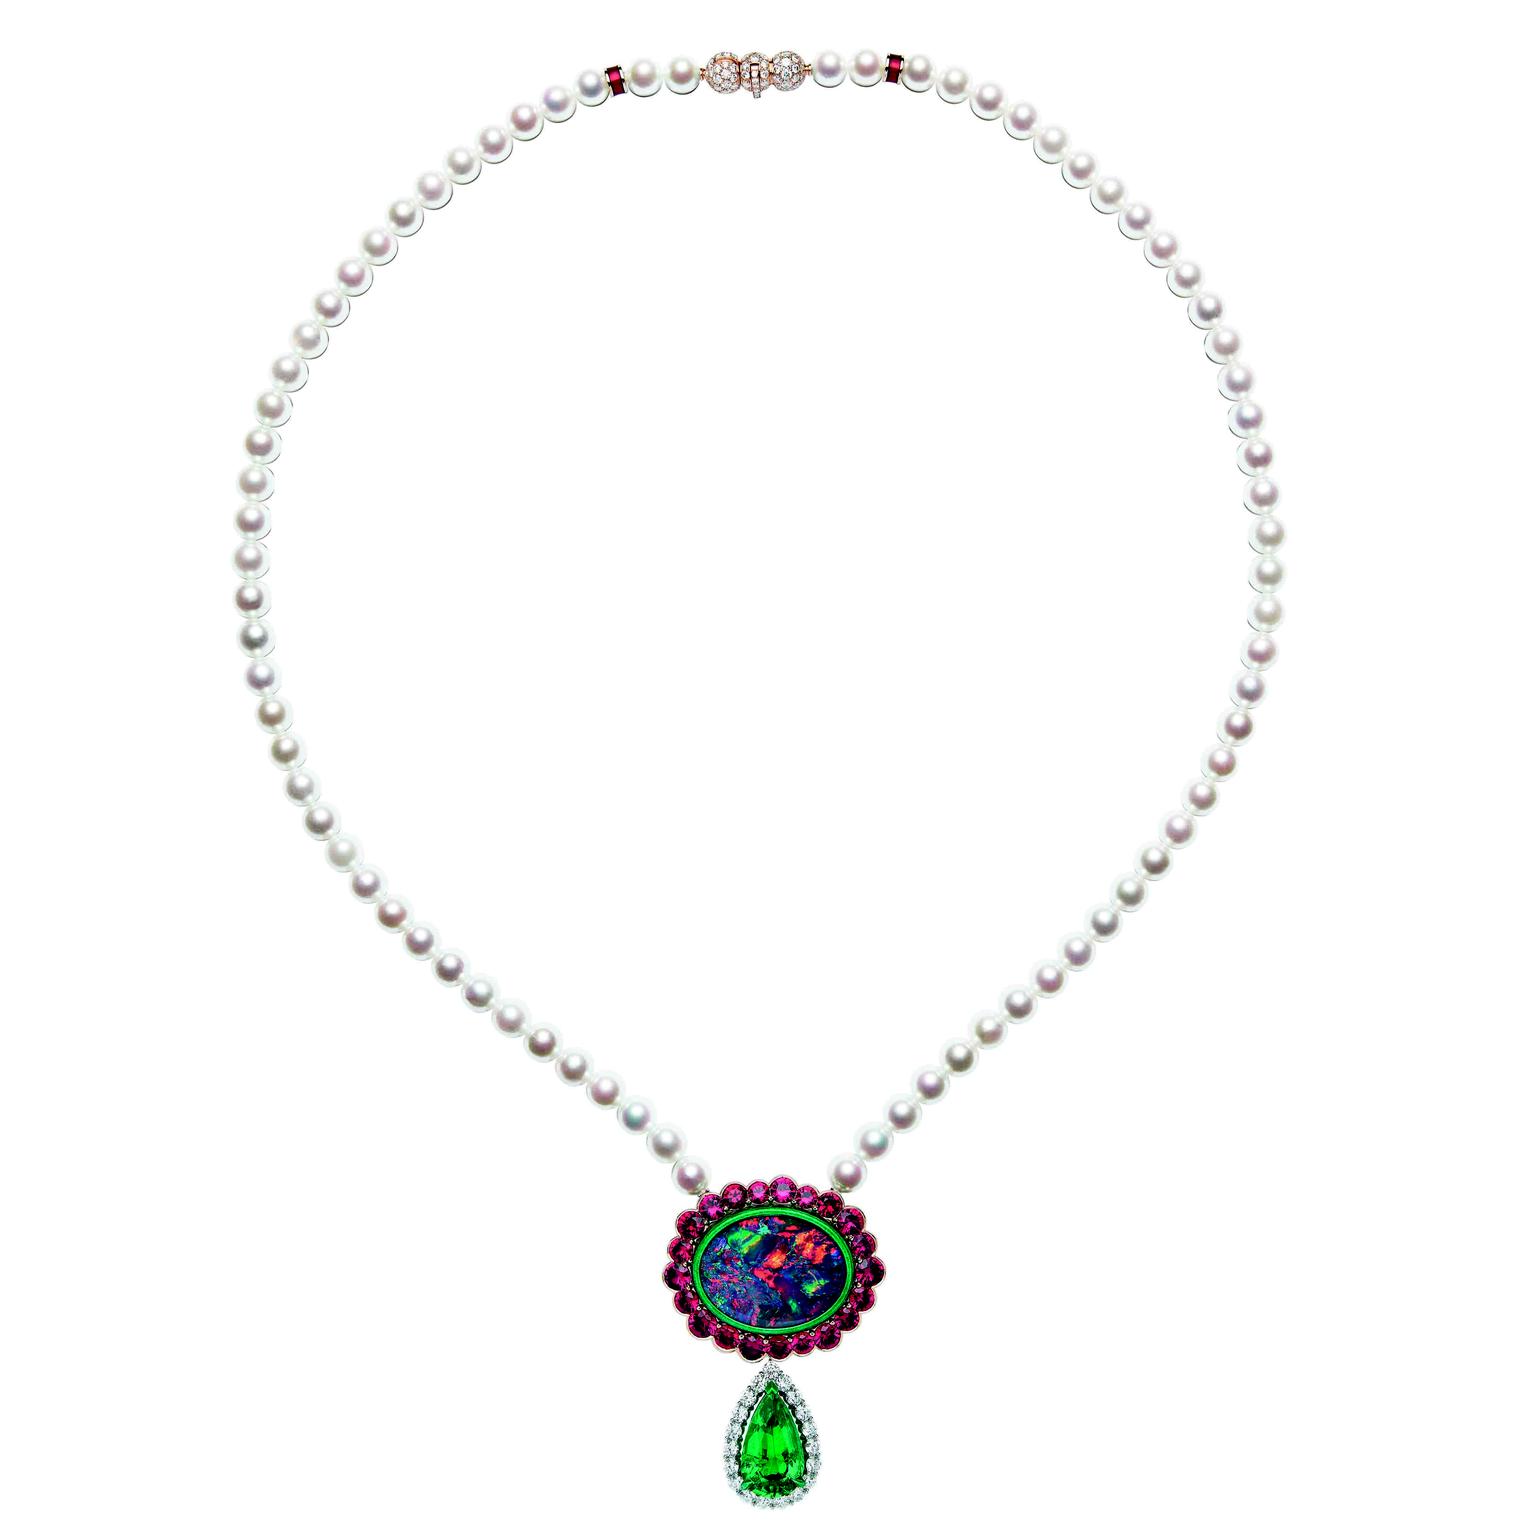 Dior et Moi high jewellery necklace with emerald